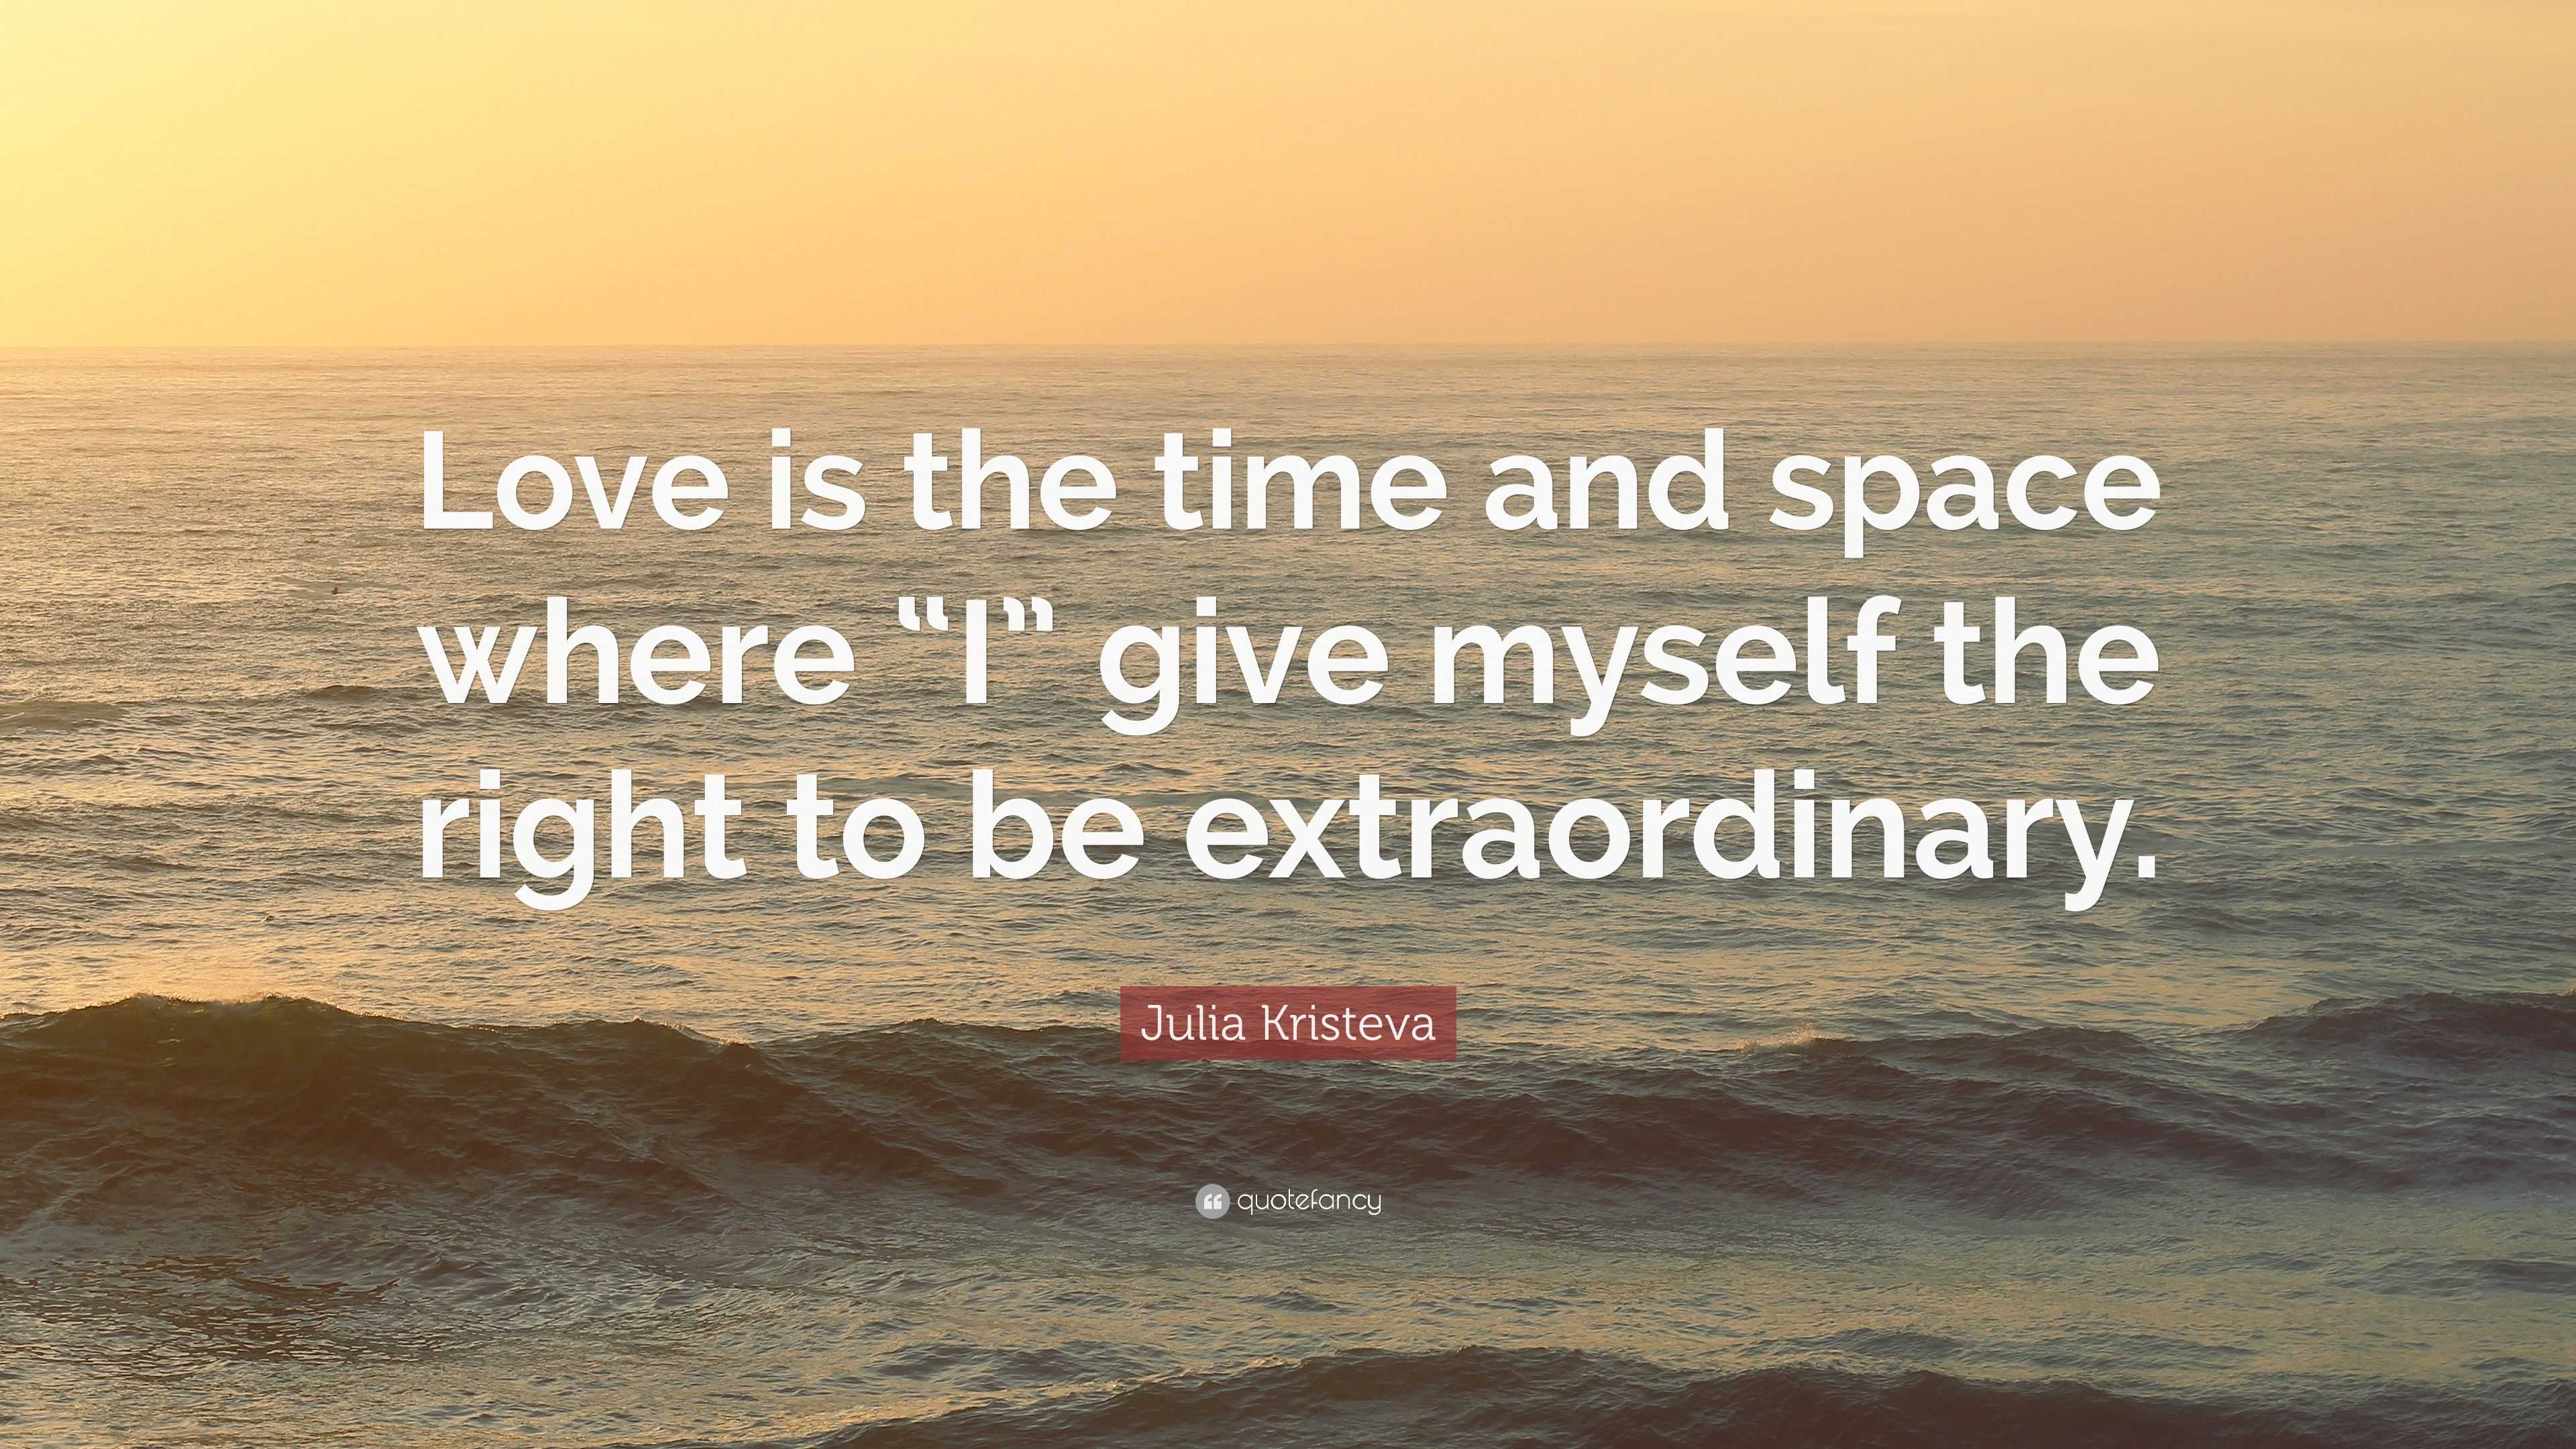 Julia Kristeva Quote “Love is the time and space where “I” give